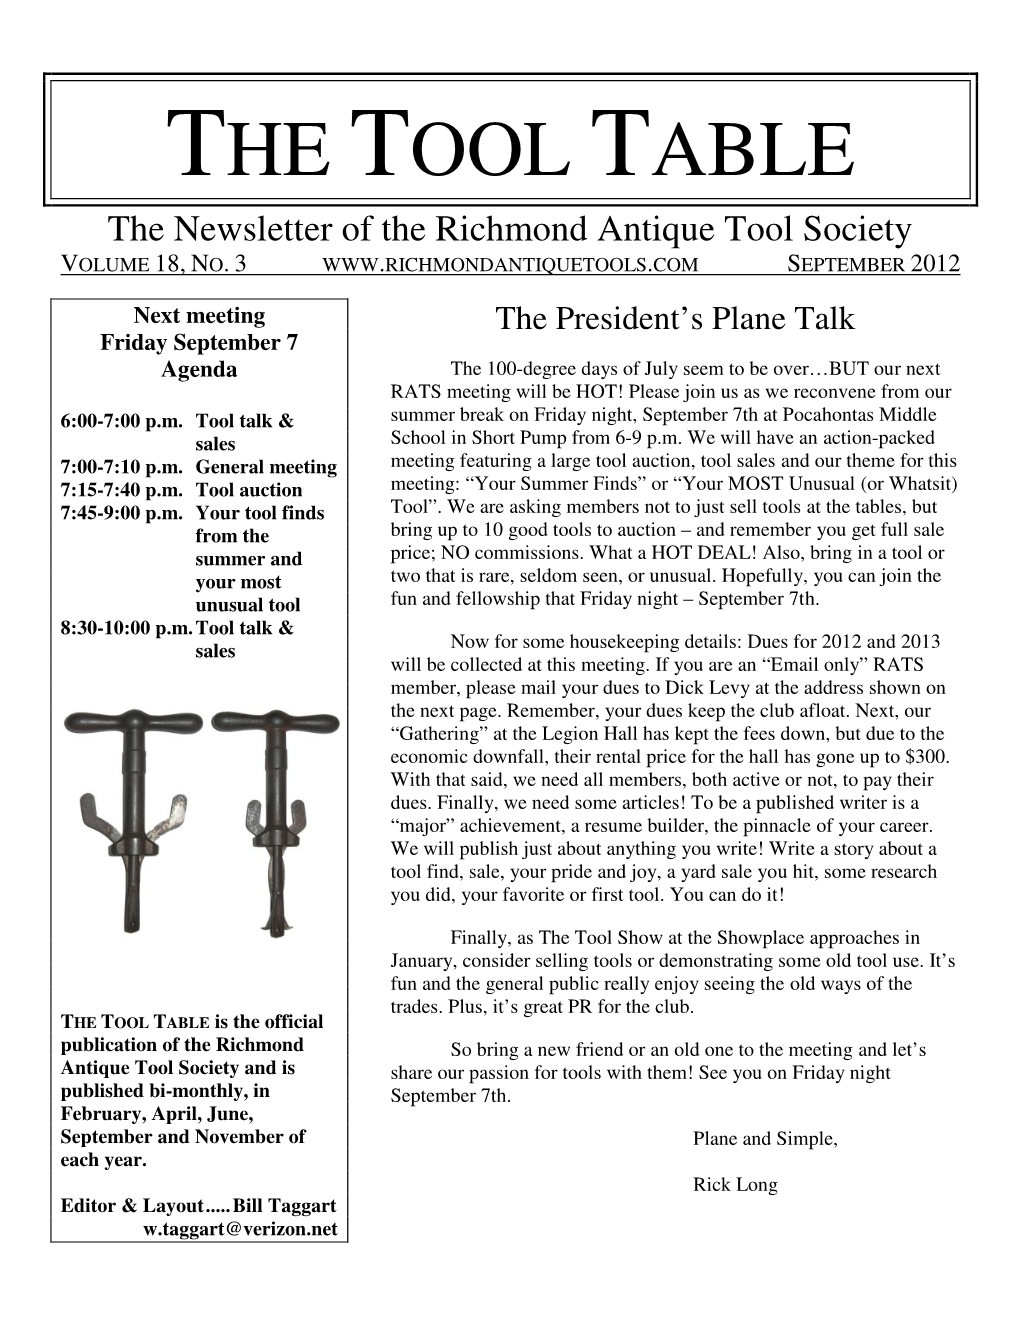 THE TOOL TABLE the Newsletter of the Richmond Antique Tool Society VOLUME 18, NO